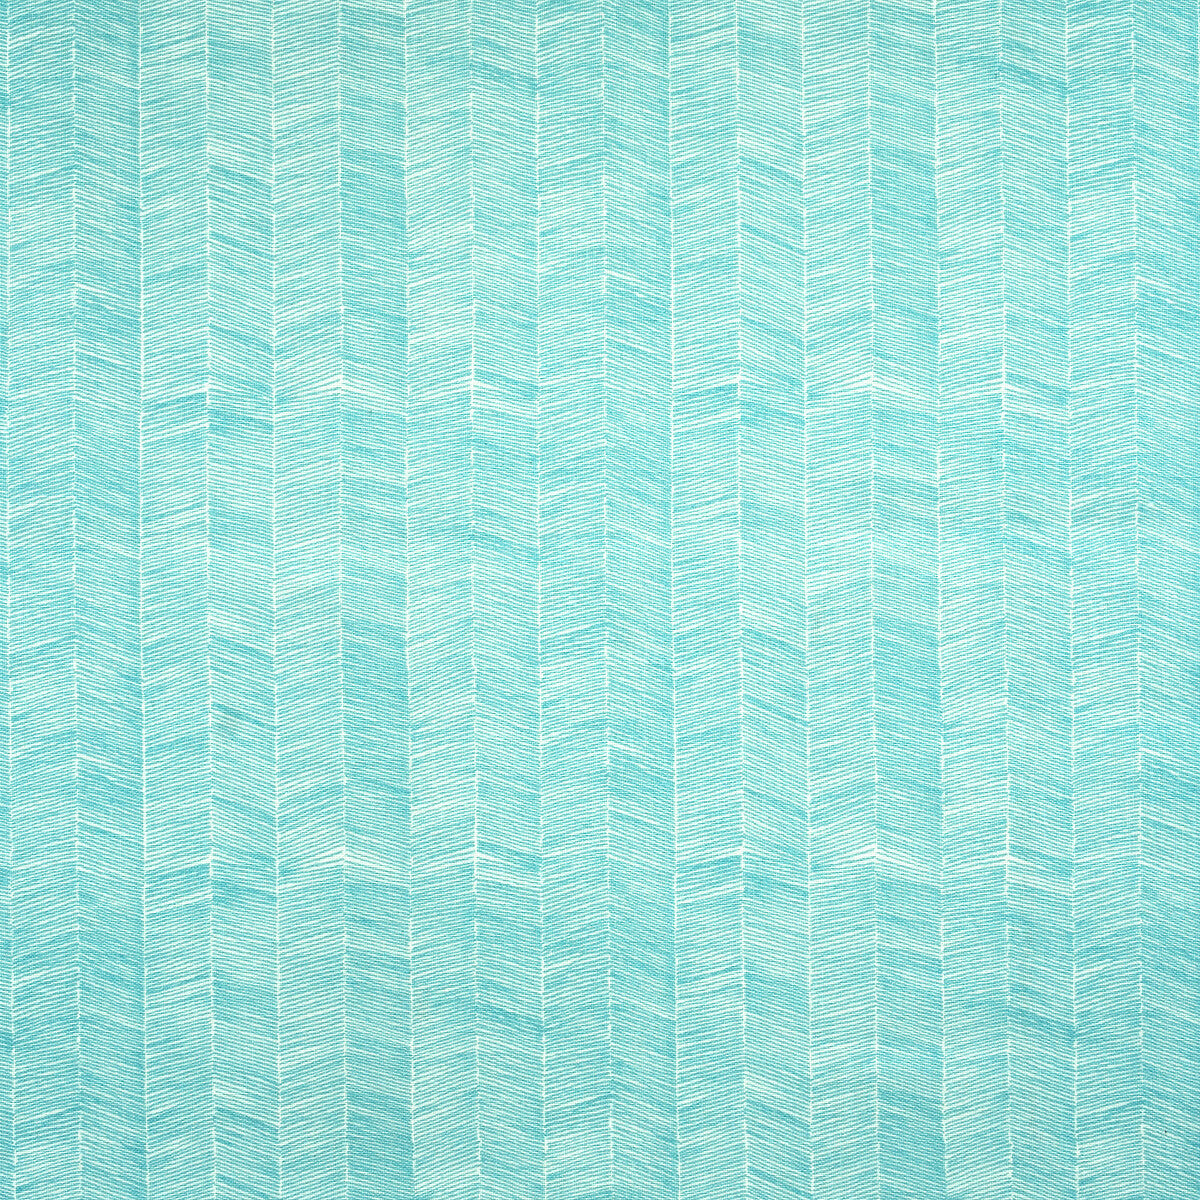 Delta Outdoor fabric in lagoon color - pattern AM100347.13.0 - by Kravet Couture in the Andrew Martin The Great Outdoors collection